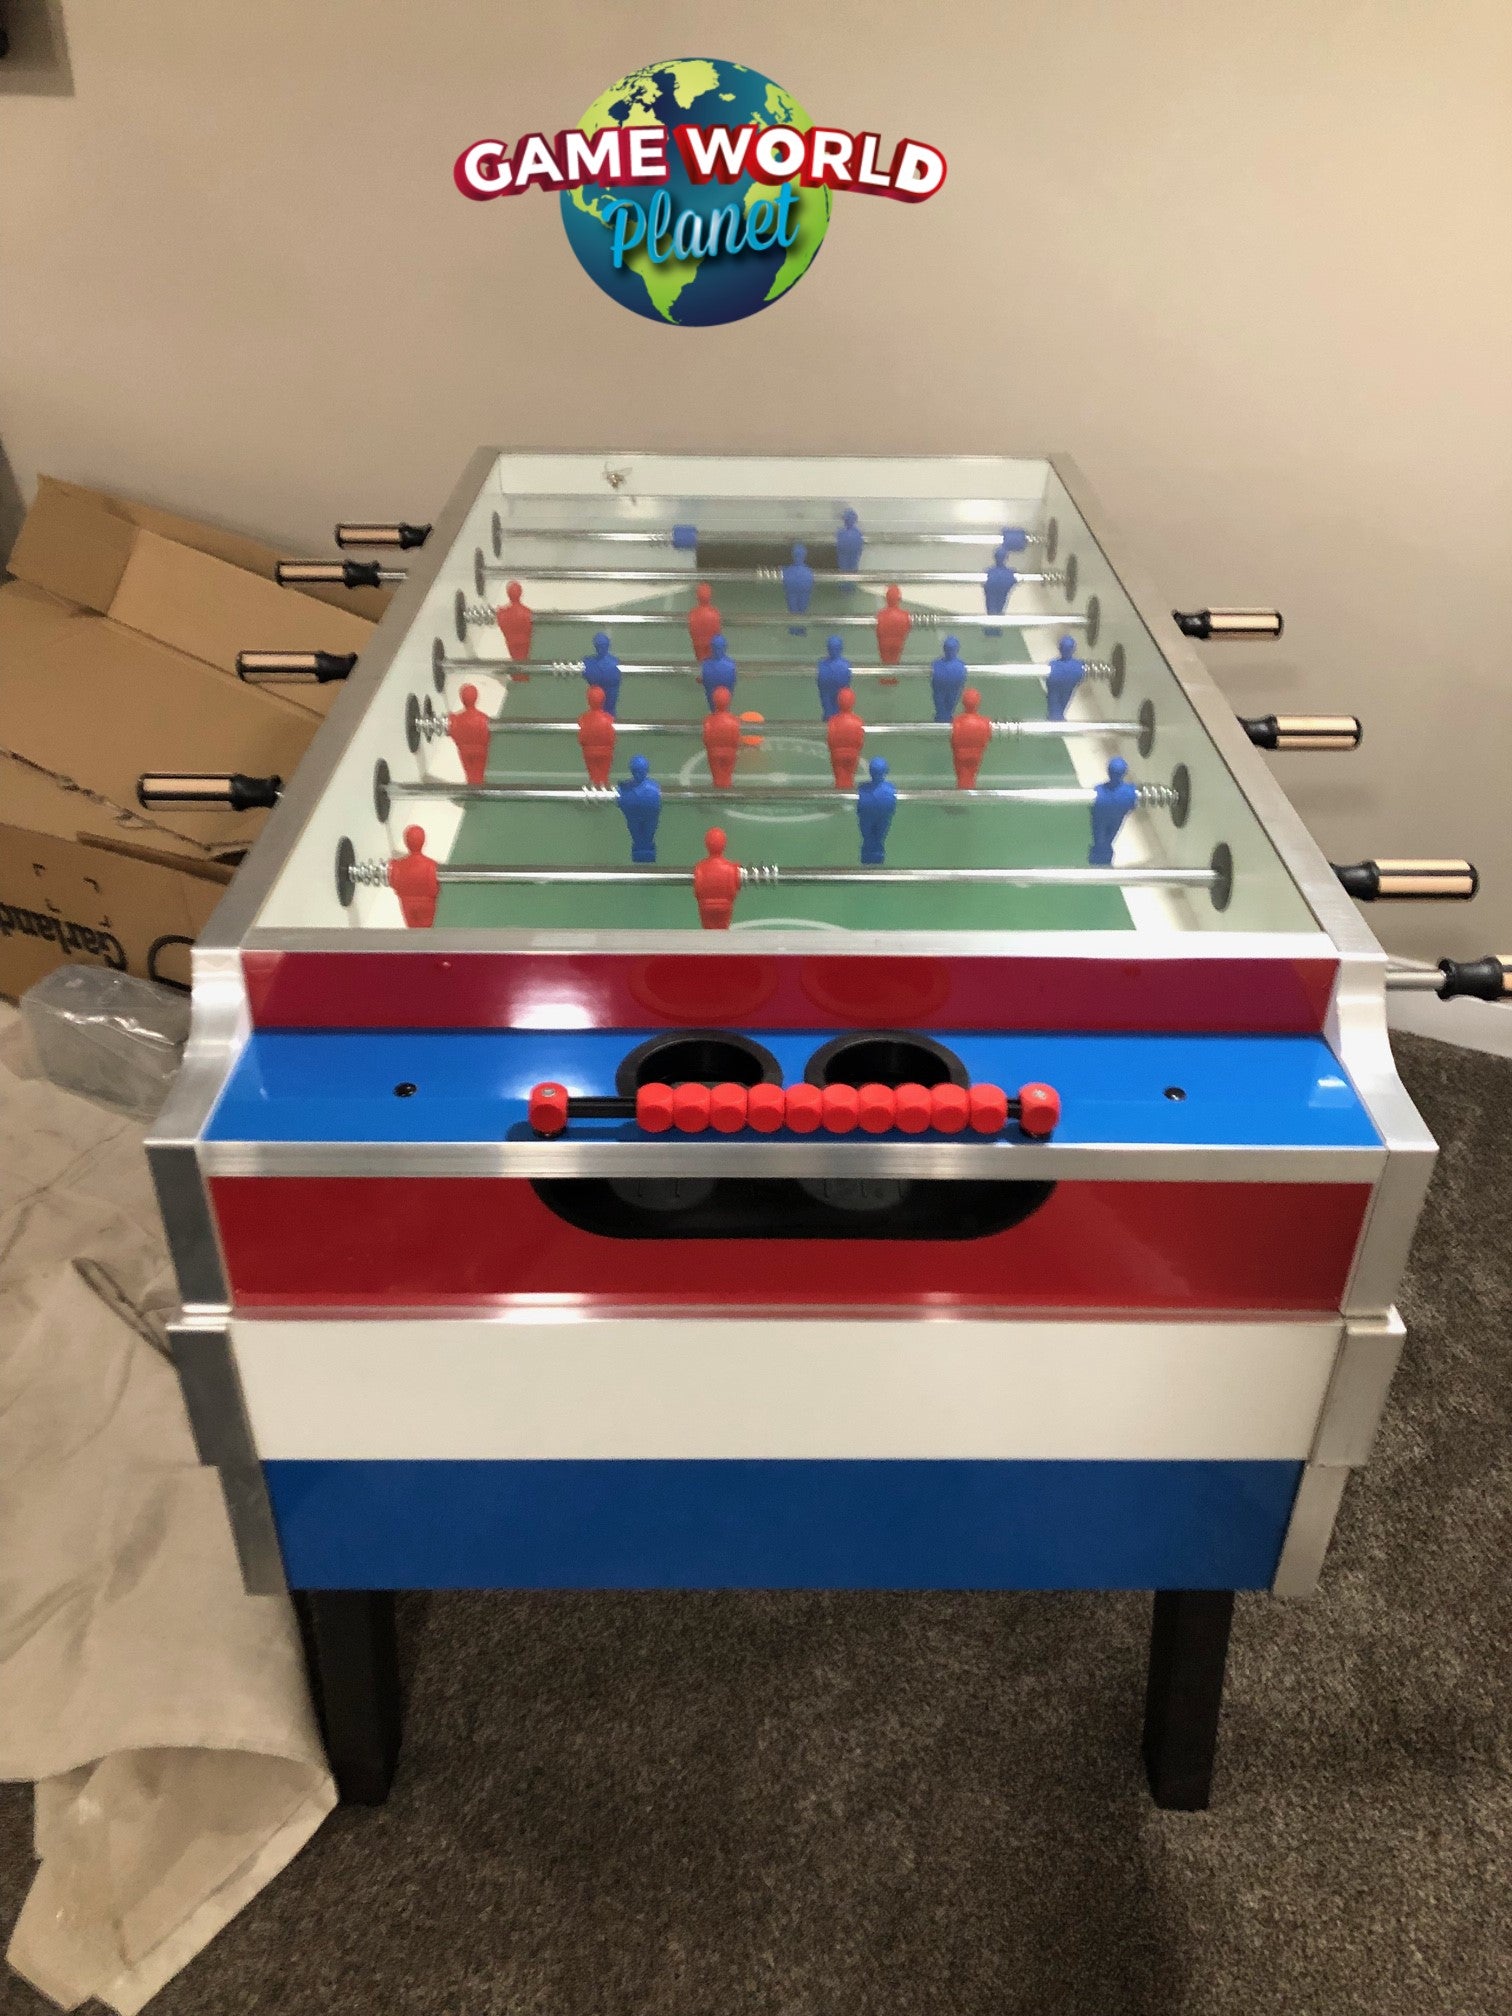 Garlando Coperto Foosball Table in Red, White & Blue (Coin-Operated)